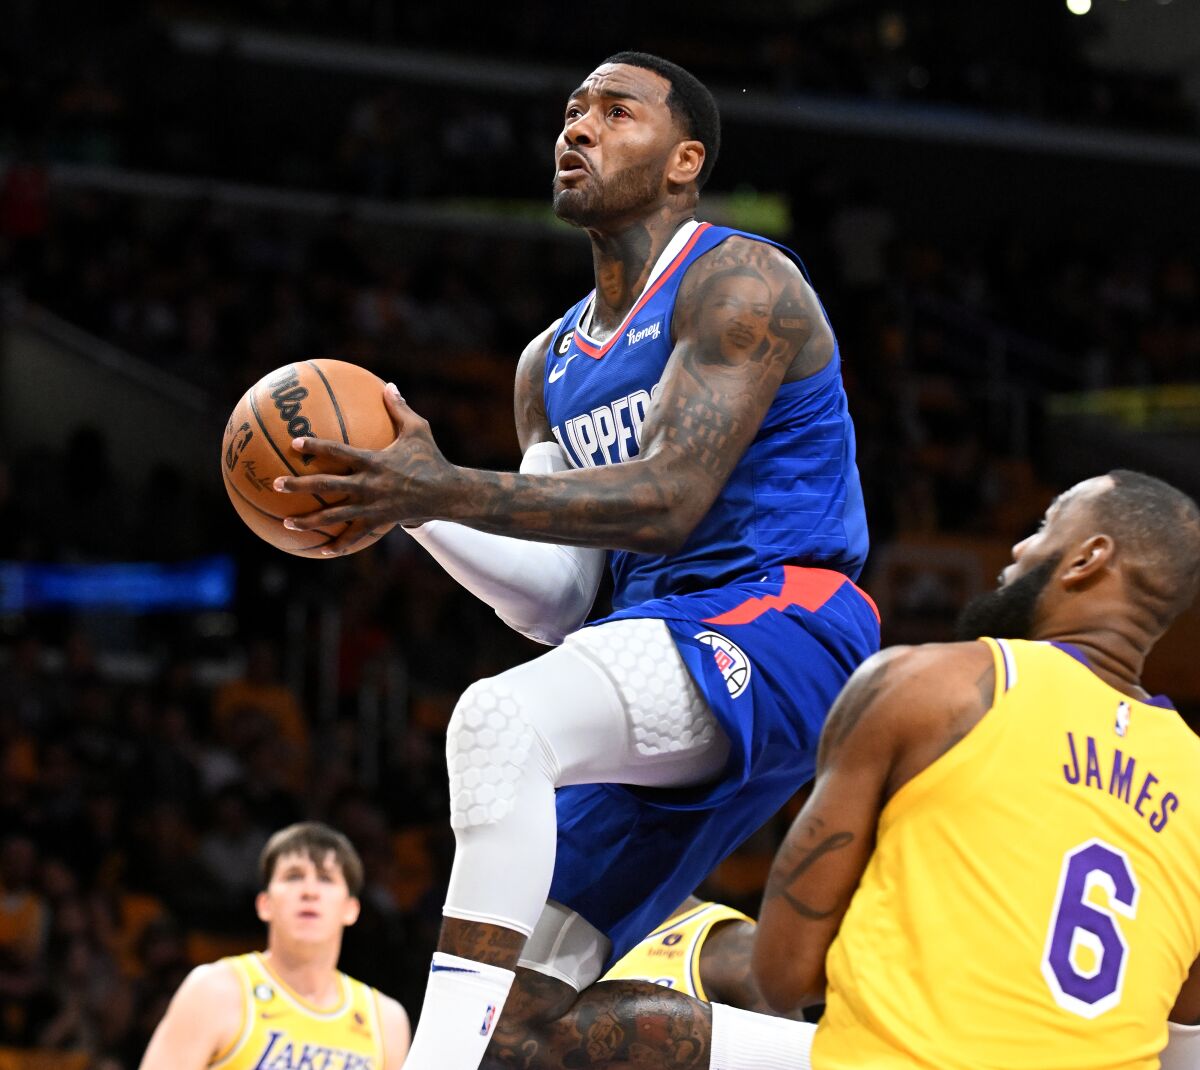 Clippers guard John Wall drives through the Lakers defense to score in the second quarter on Thursday.